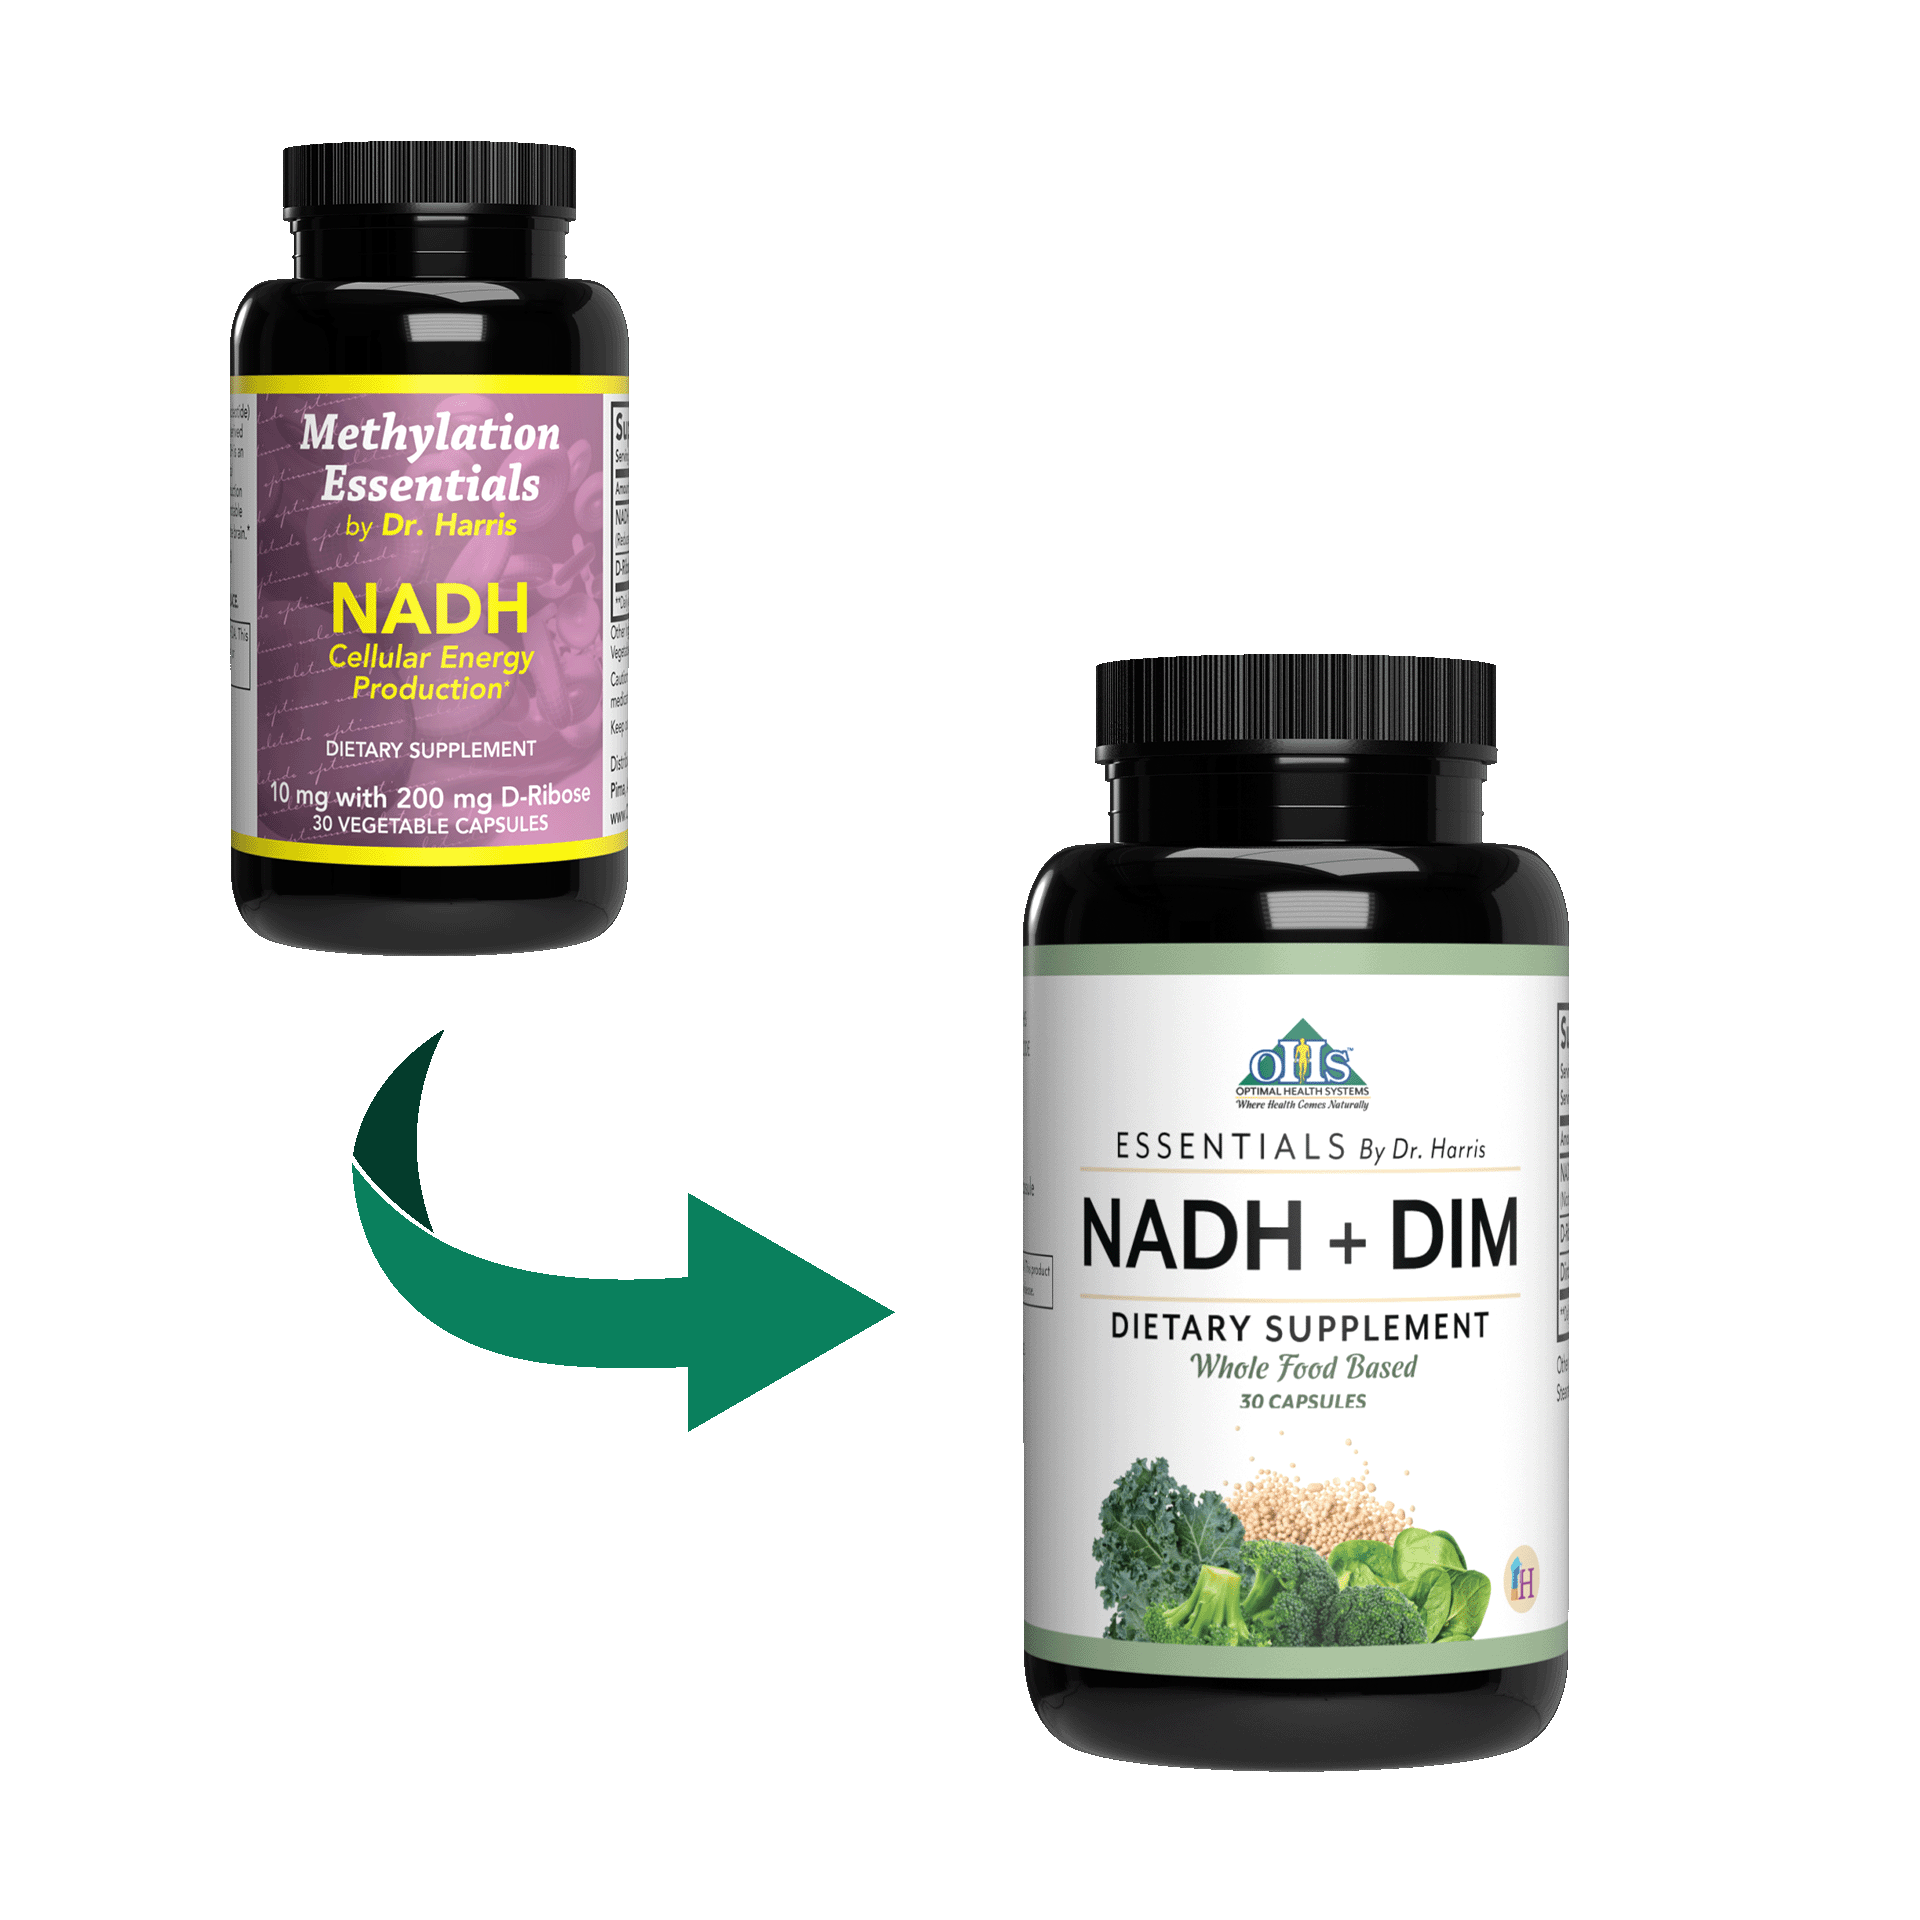 Image of a bottle of NADH with a green arrow pointing to its new label design called NADH+DIM.